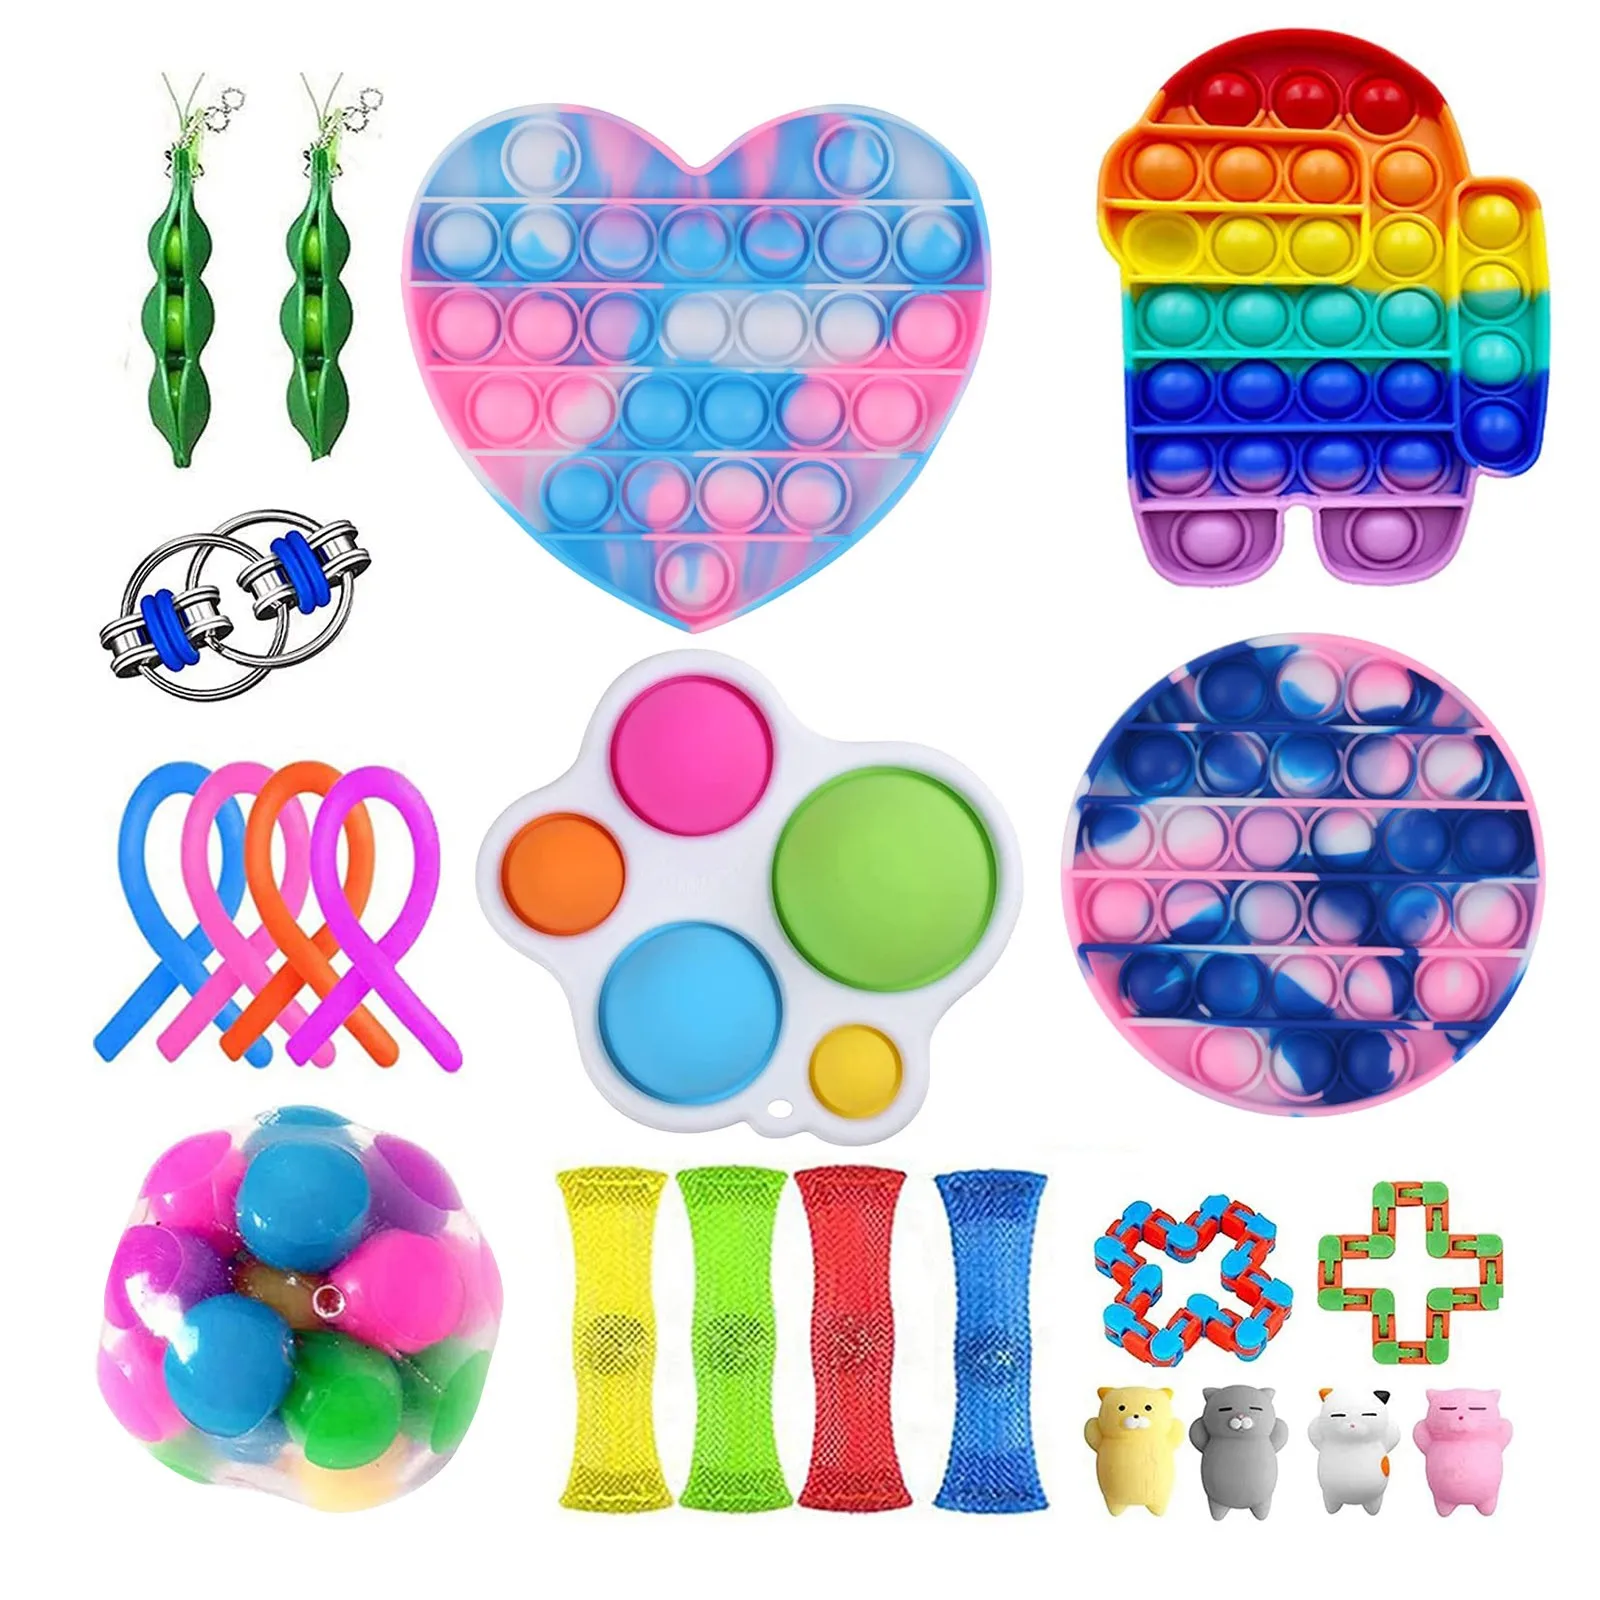 

Fidget Toys Antistress Toy Set Stretchy Strings Push Gift Pack Adults Children Squishy Sensory Anti Stress Relief Figet Toys Kit